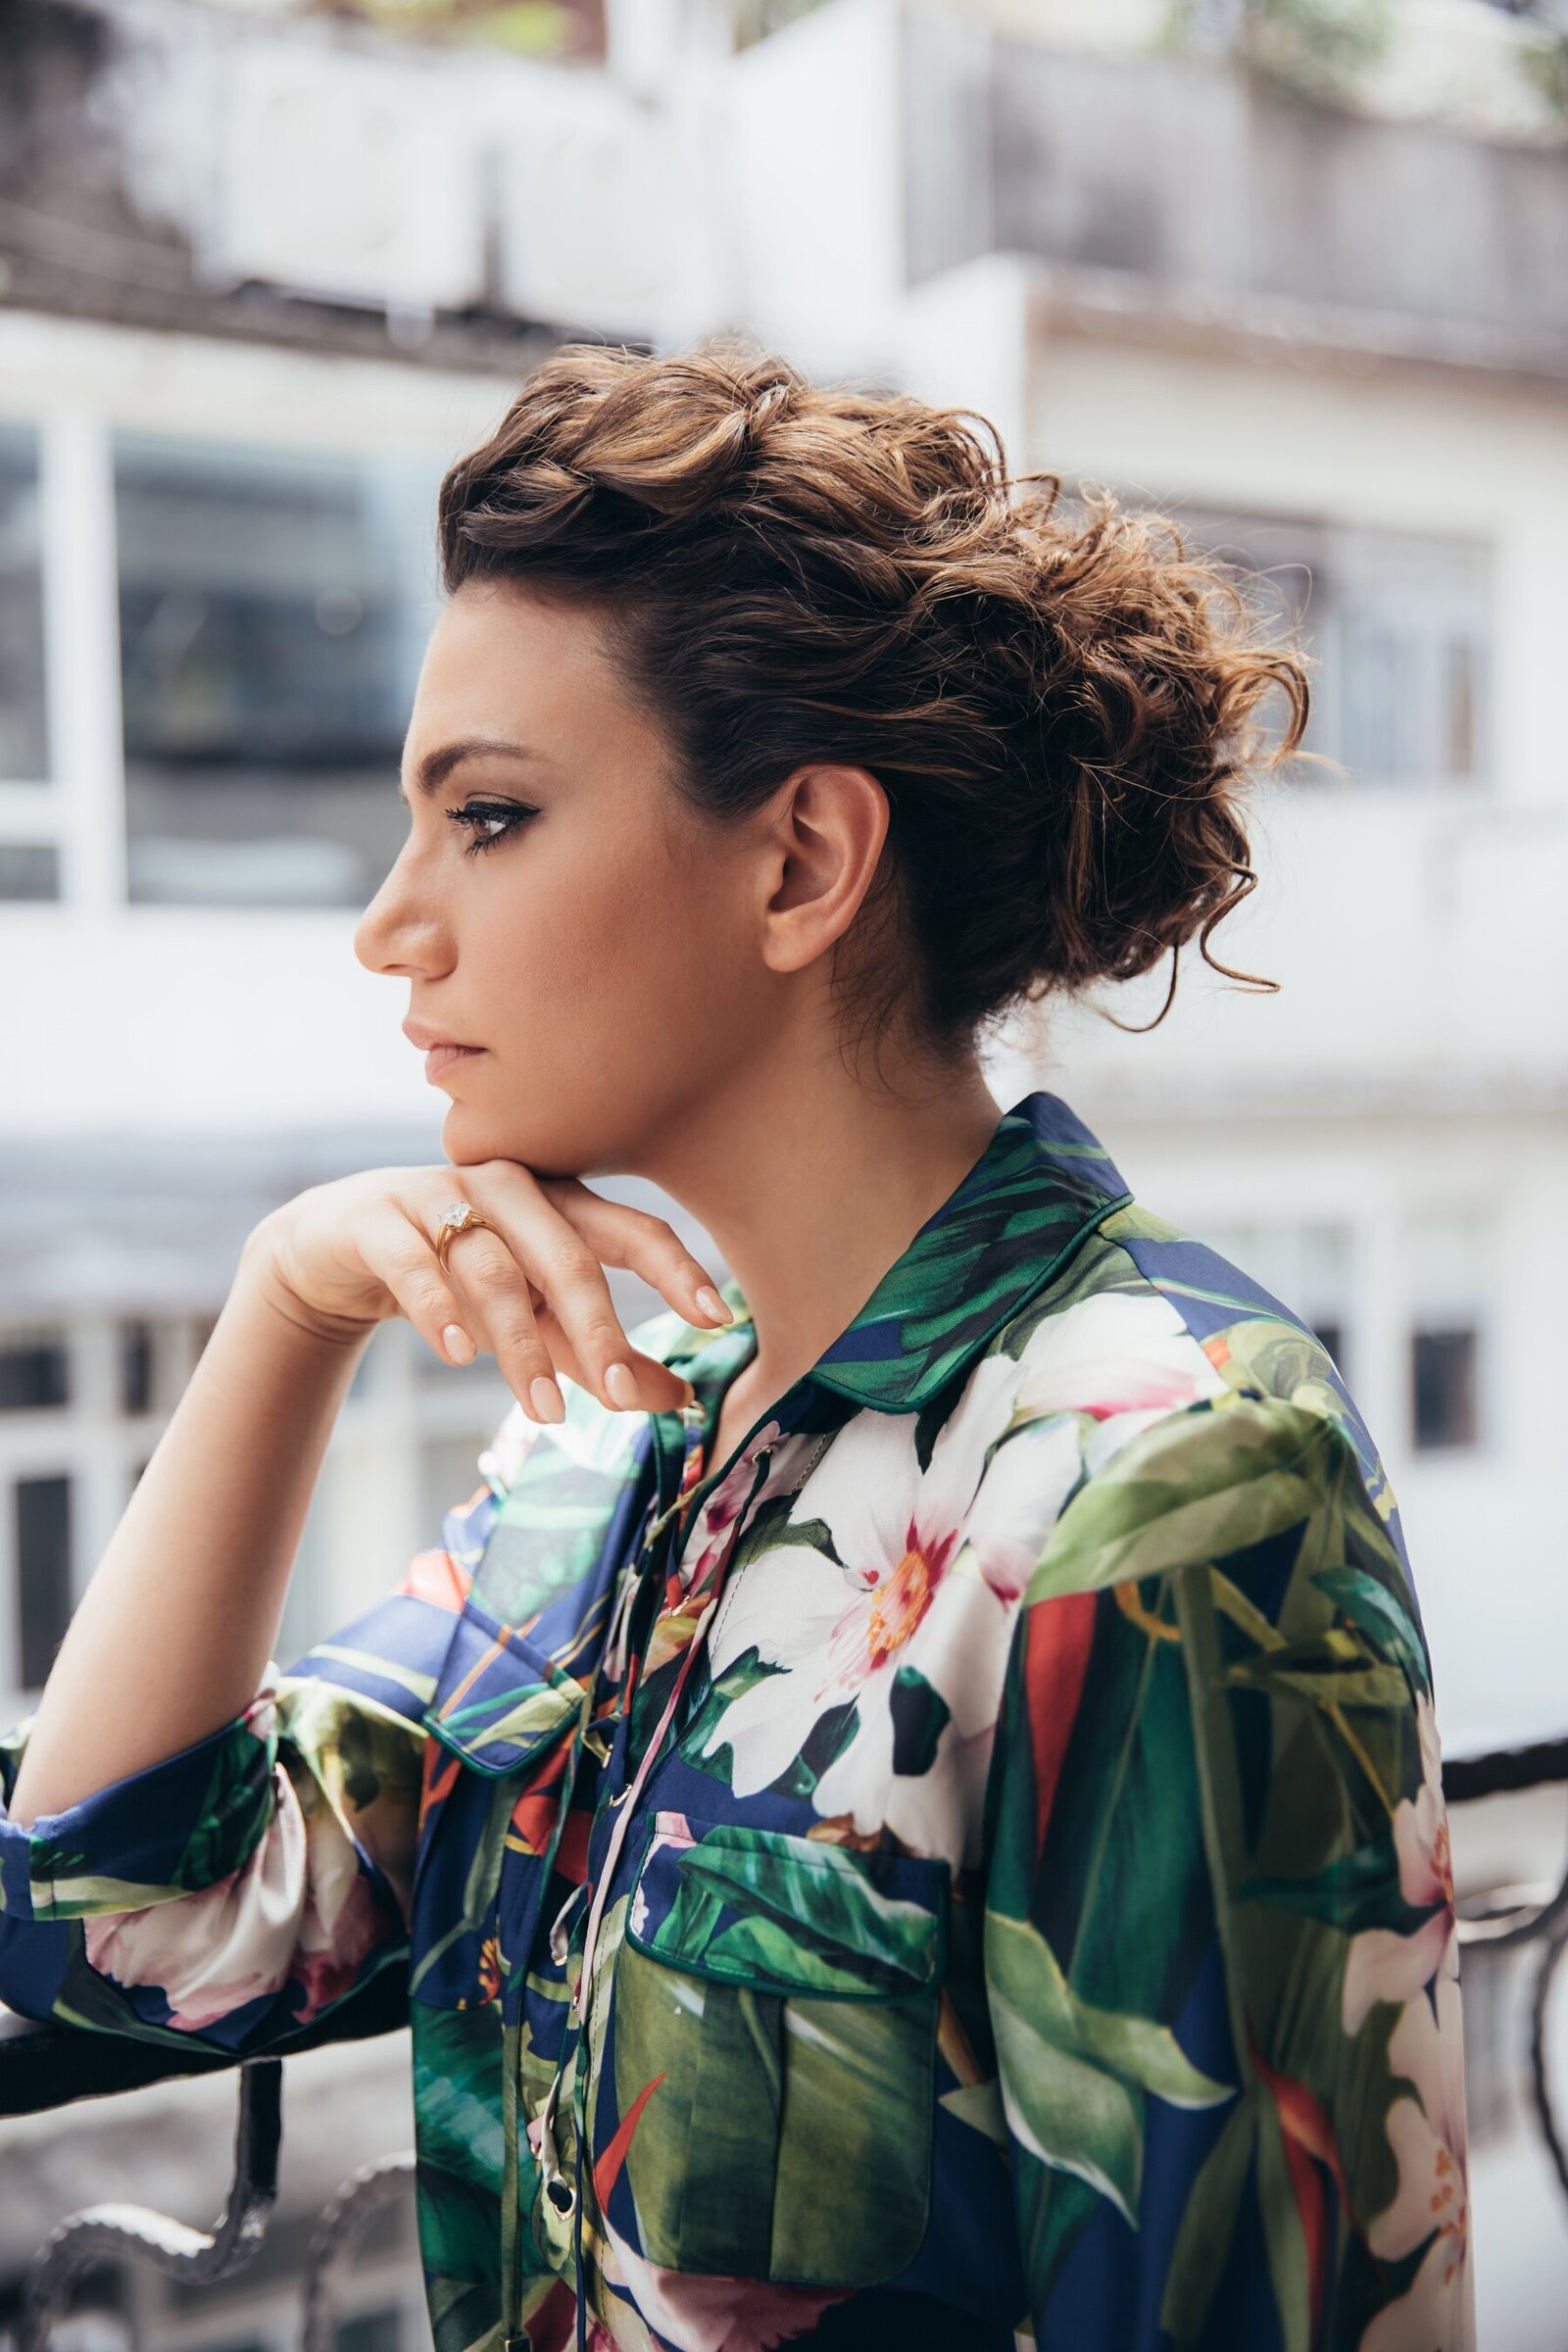 Beautiful curly hair in updo and tropical print pajamas